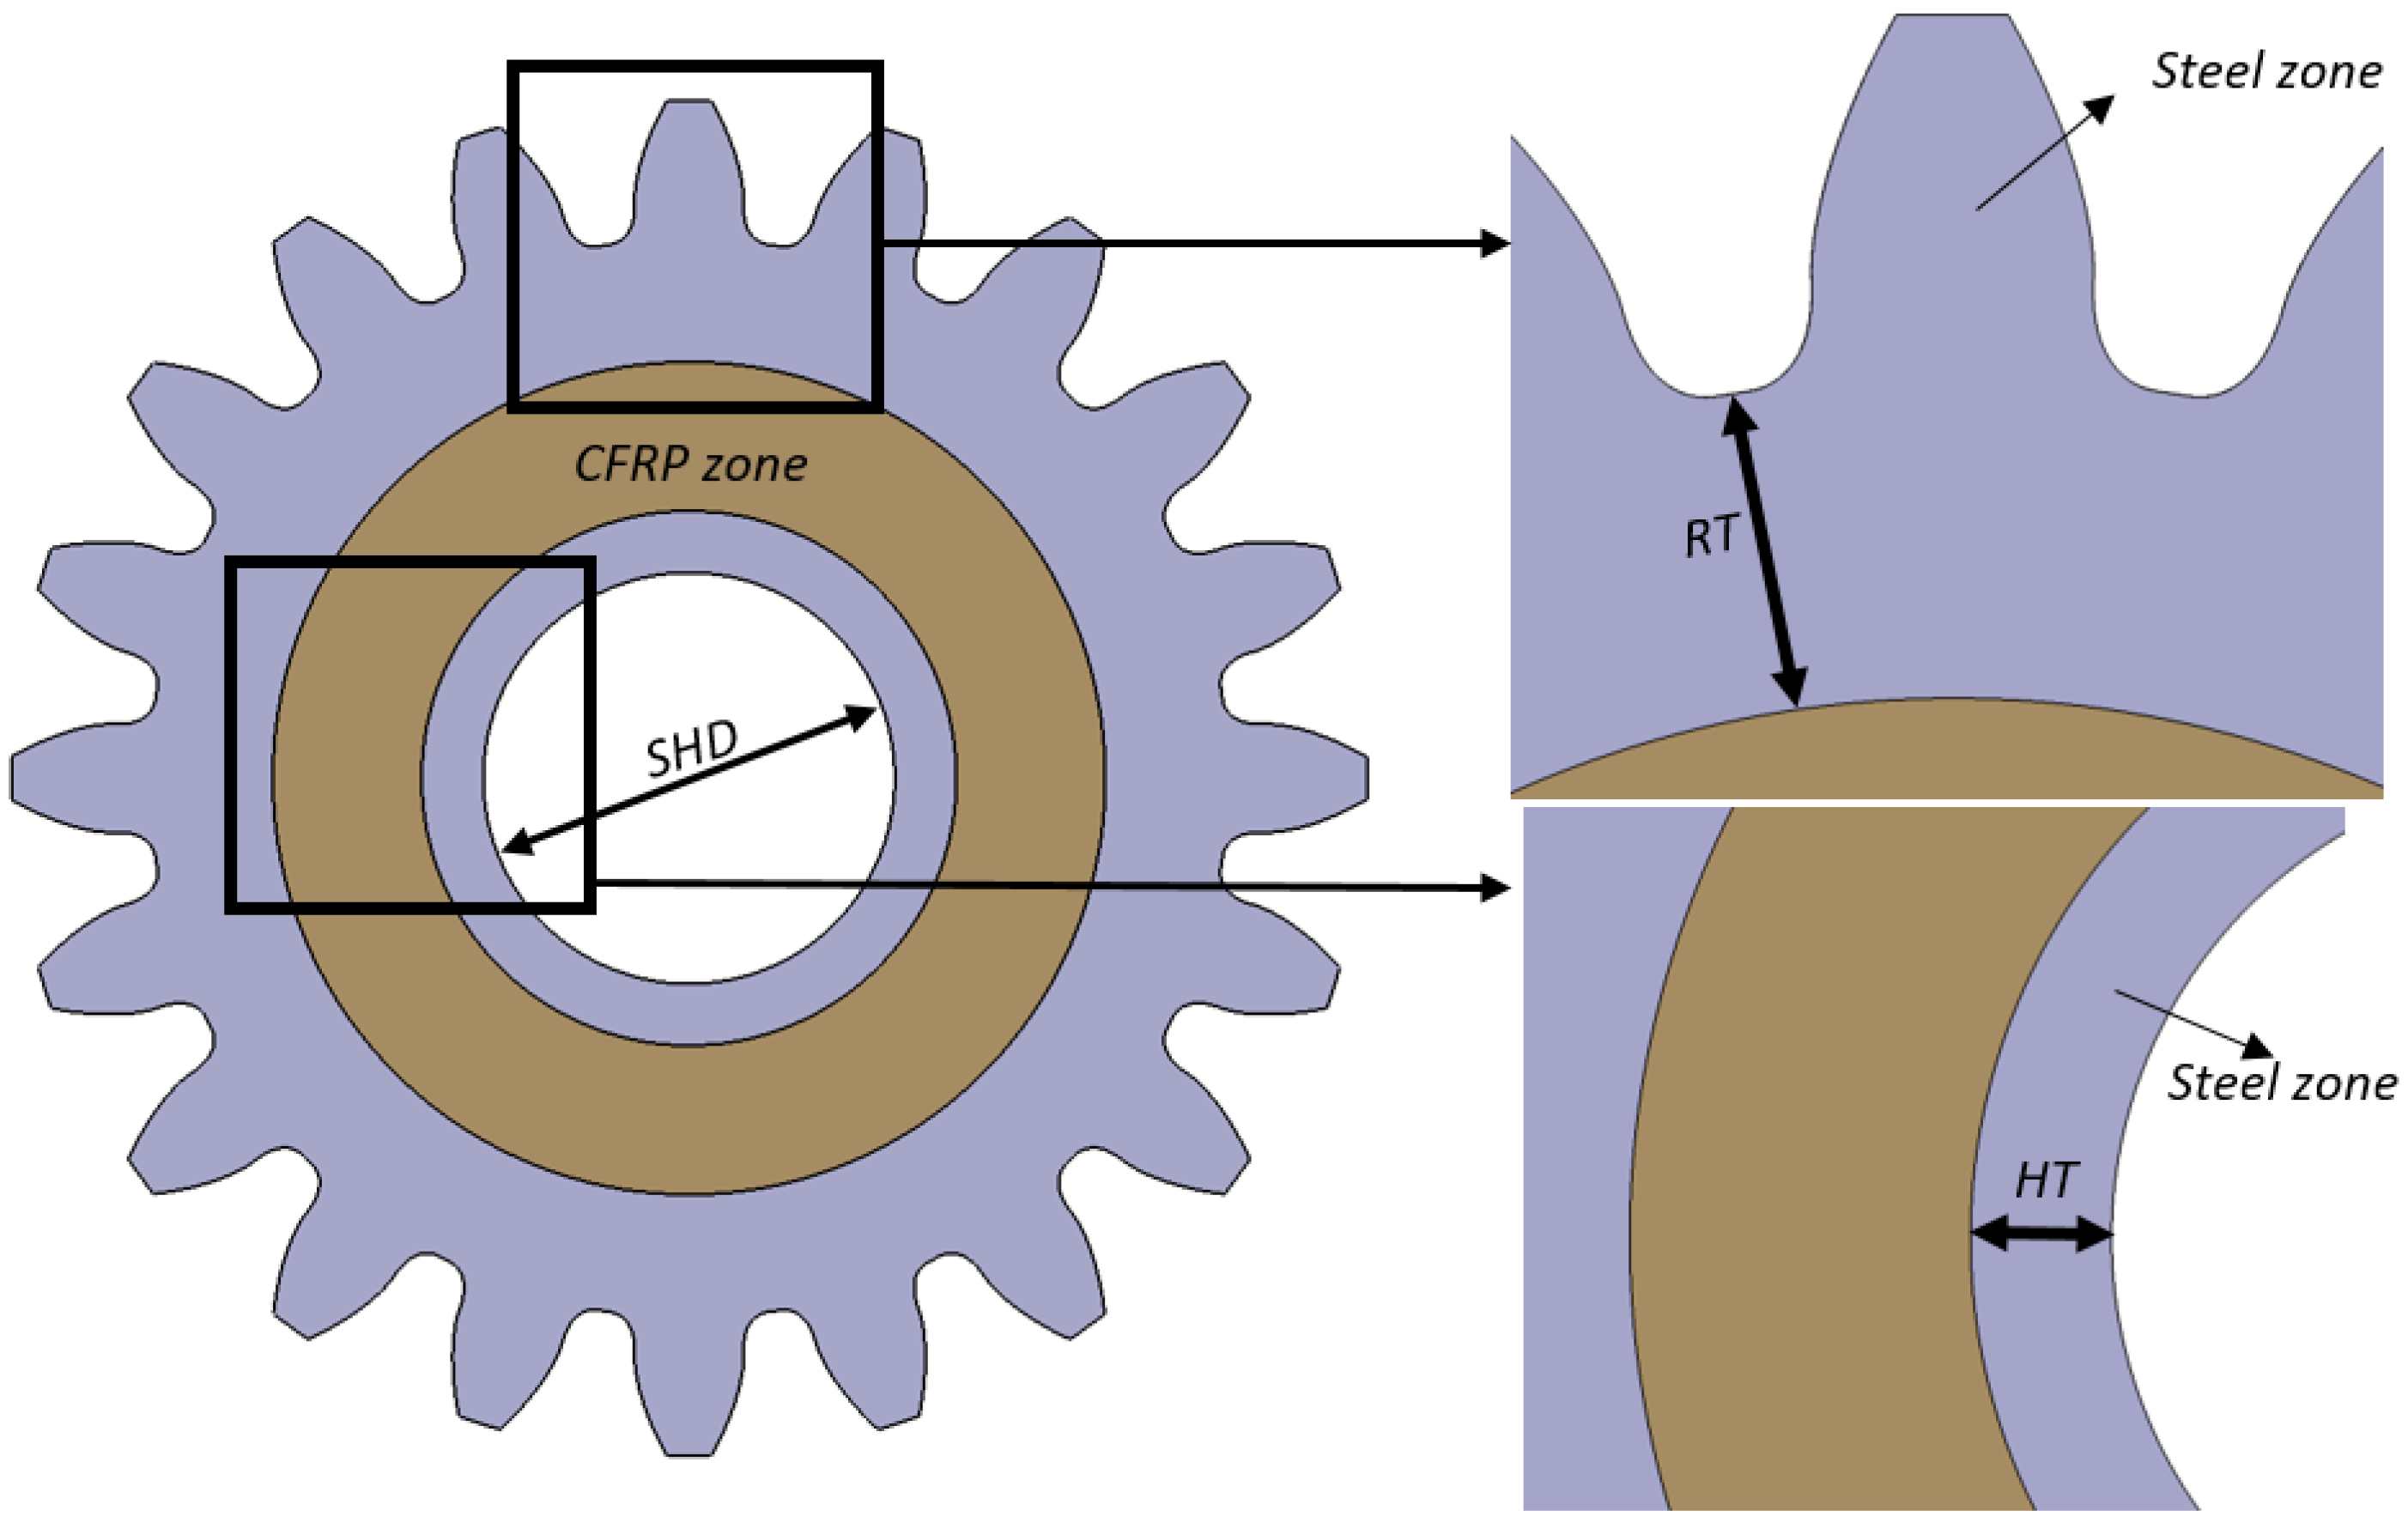 An Automatic Drawing Spur Gears Based on AutoCAD Program